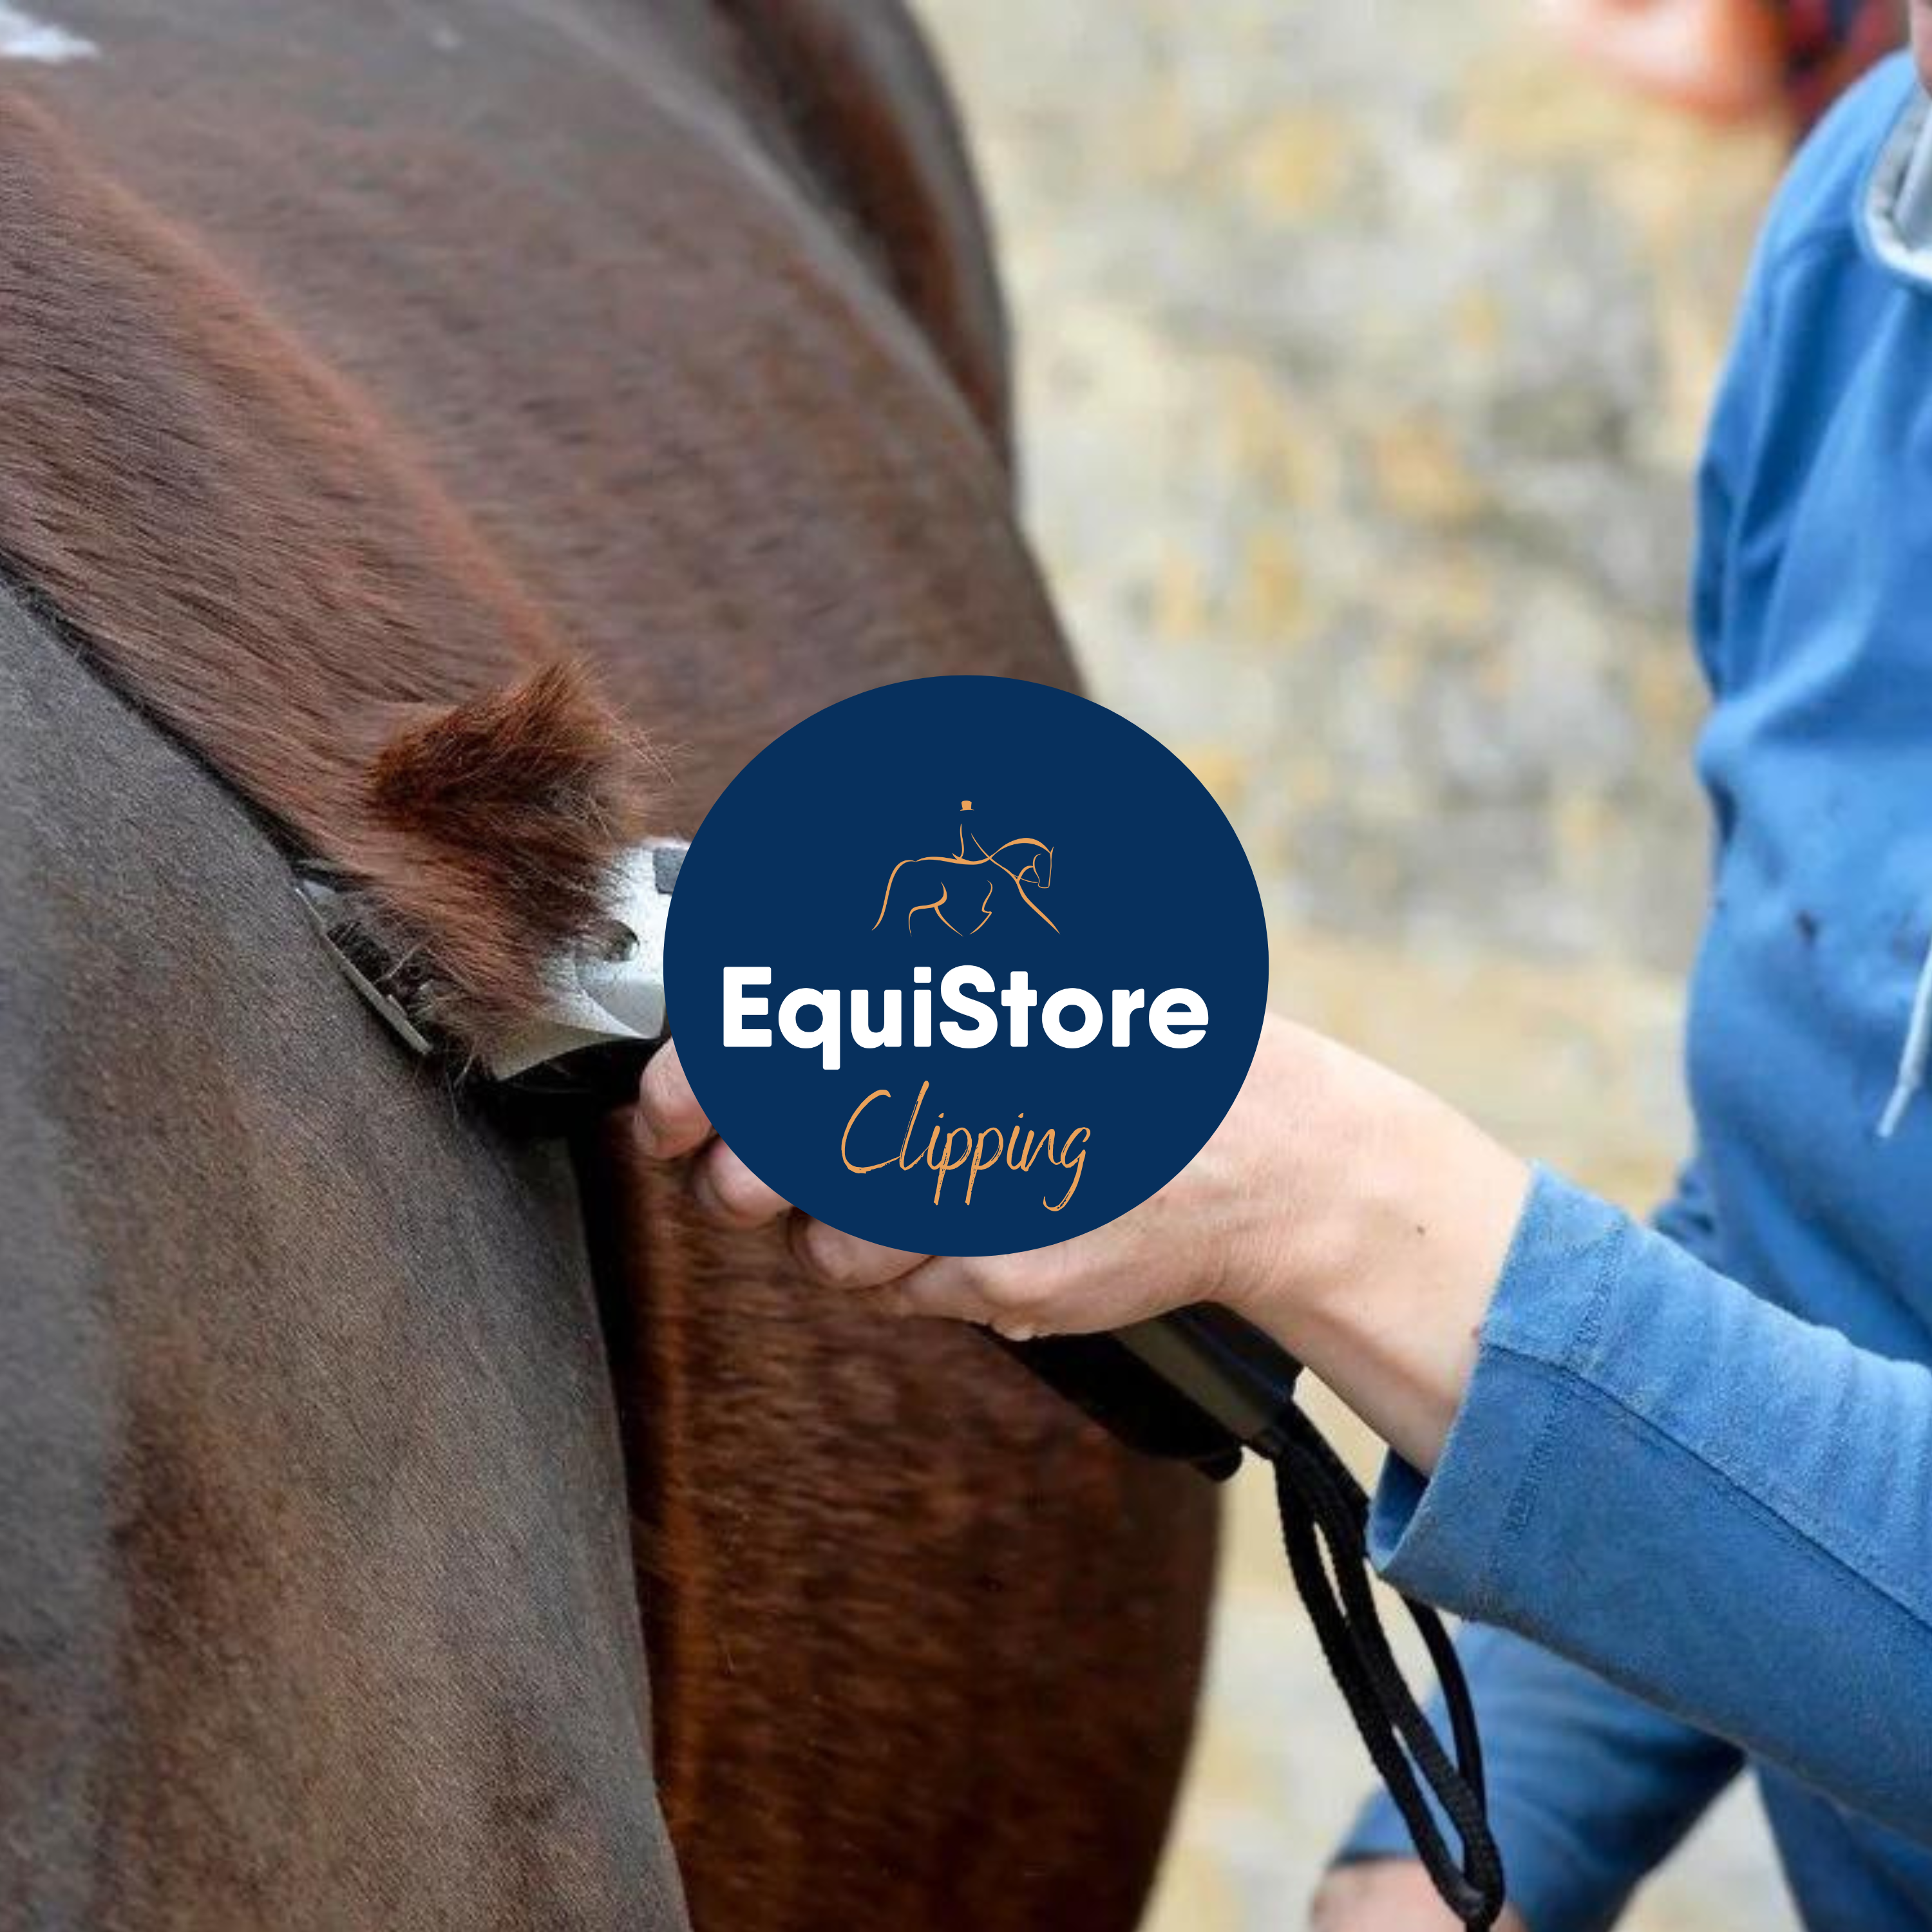 A good selection of clipping and trimming products for clipping your horses or pony, including clipper blades and clippers. Available in Ireland from Equistore. 